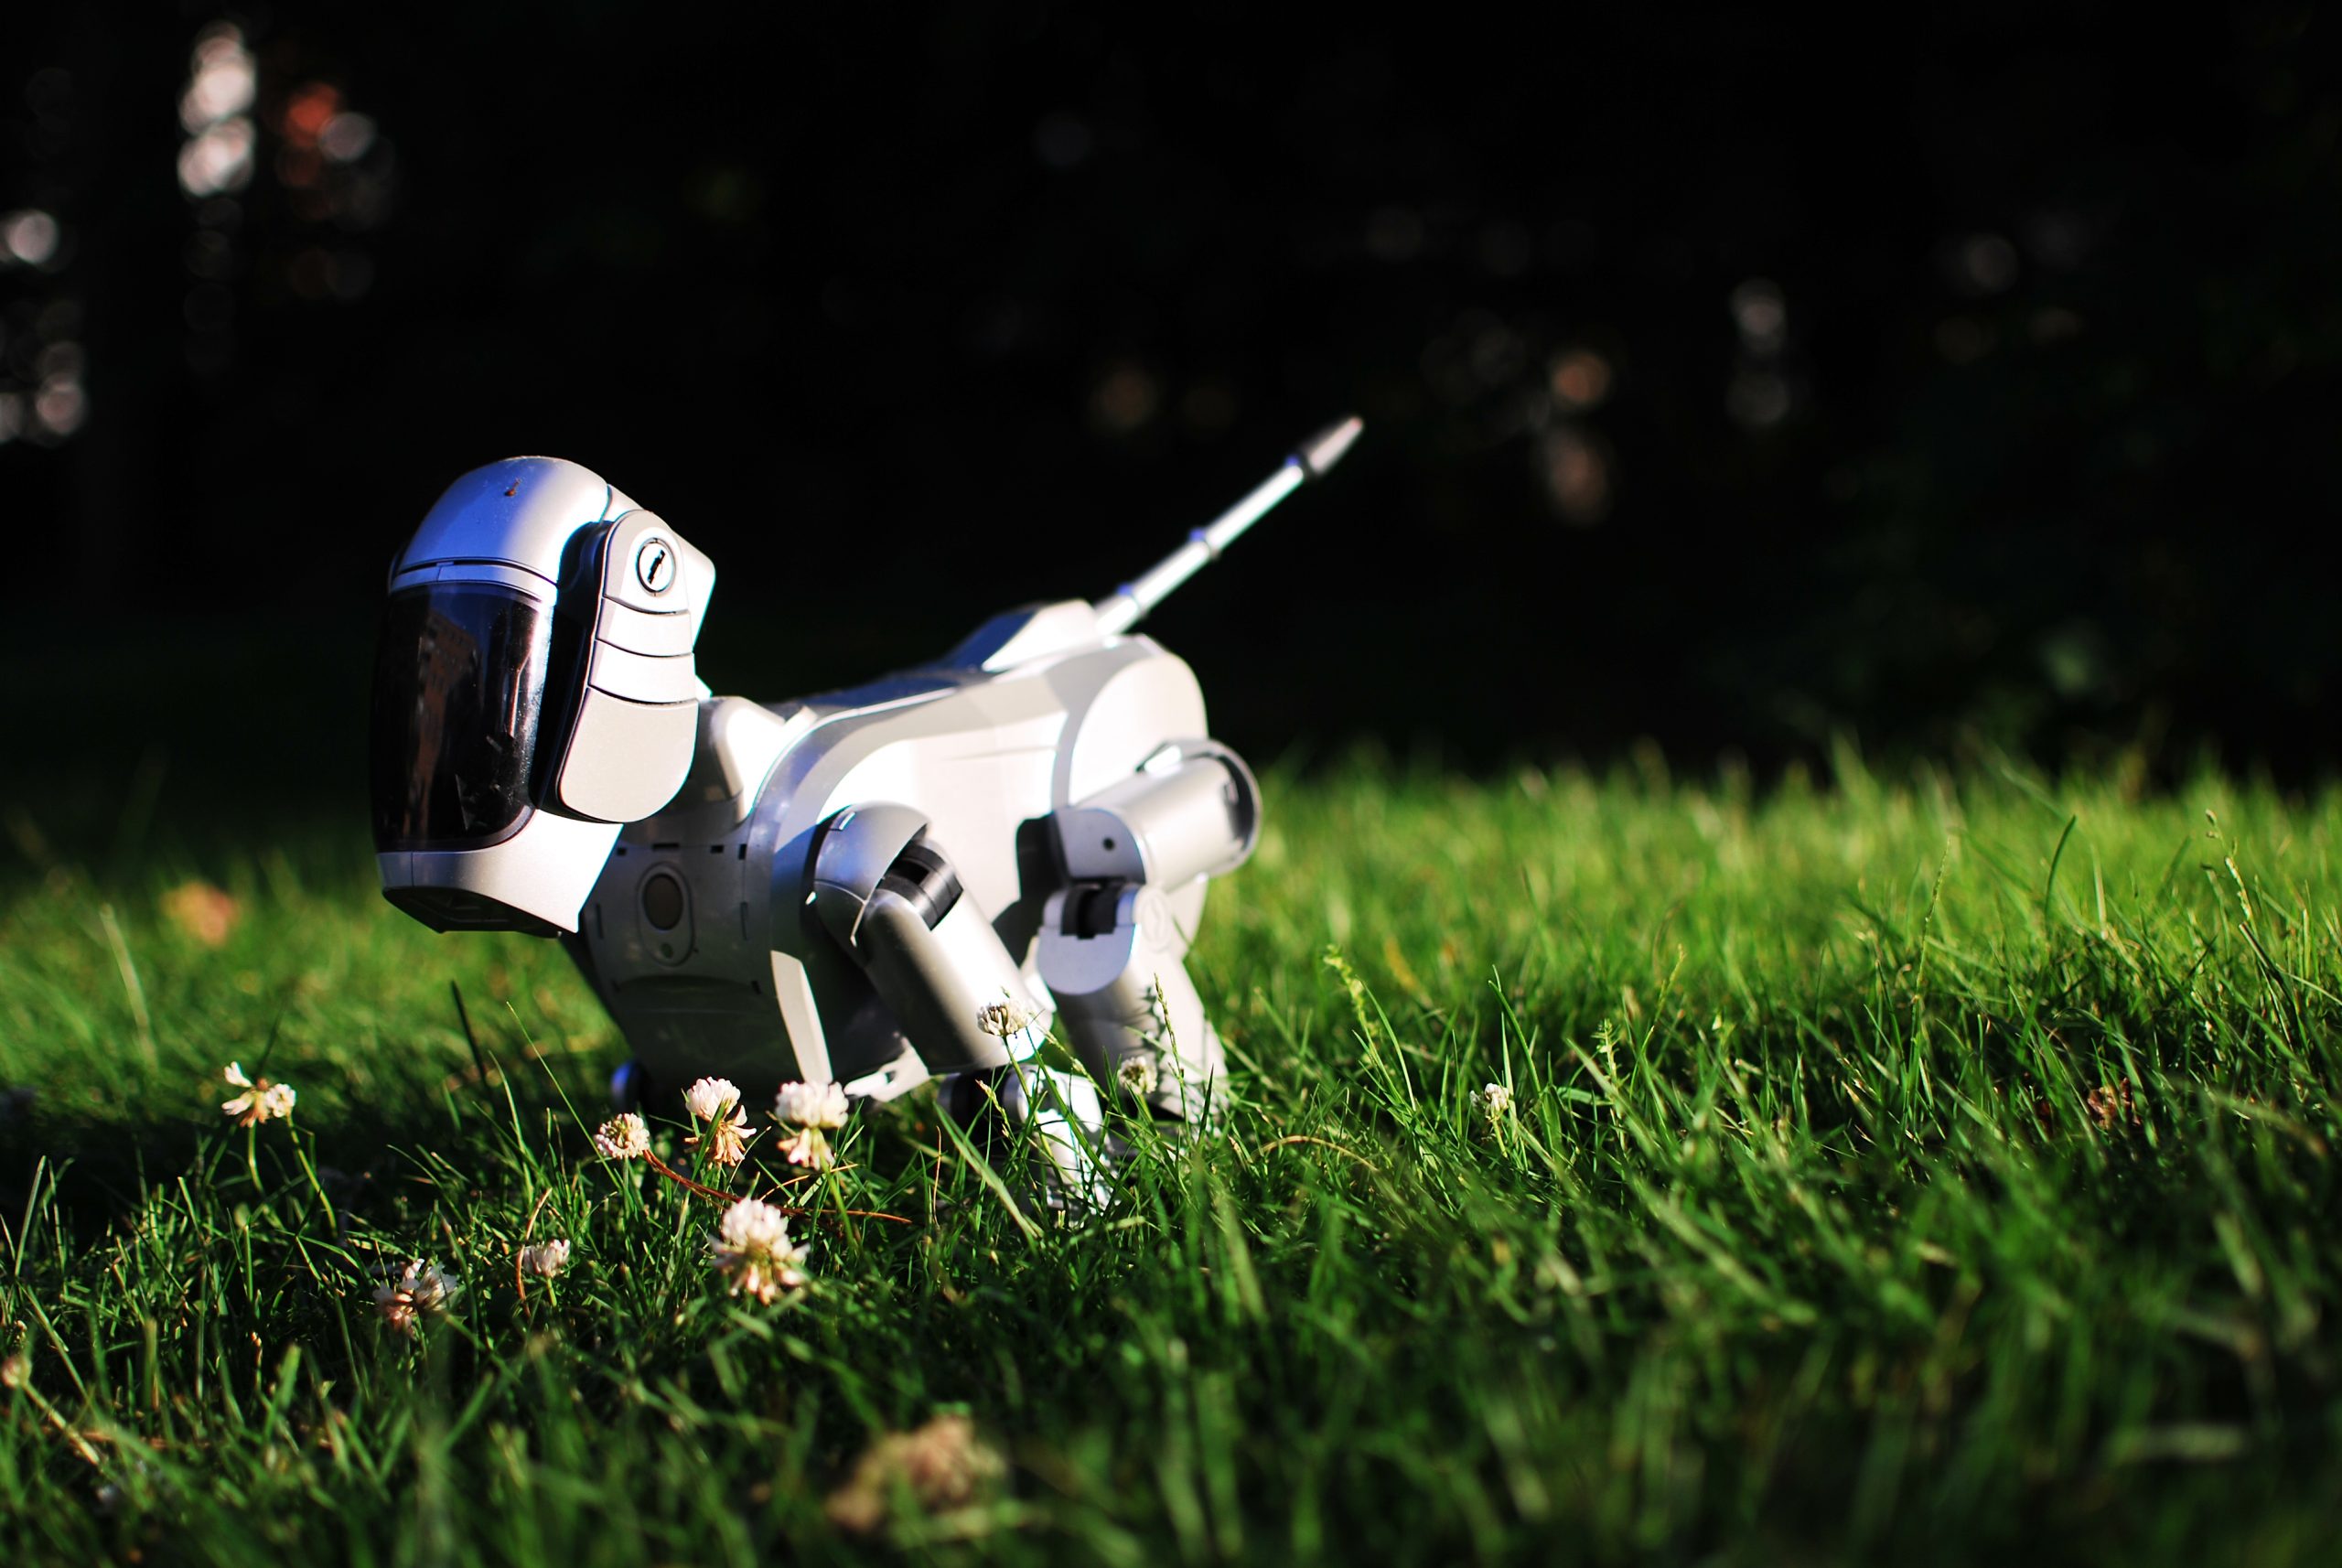 A close up photograph of an Aibo running in the grass. It is an approximately one foot tall robot dog, viewed from the side. The face is a black screen. The rest of the body is white.